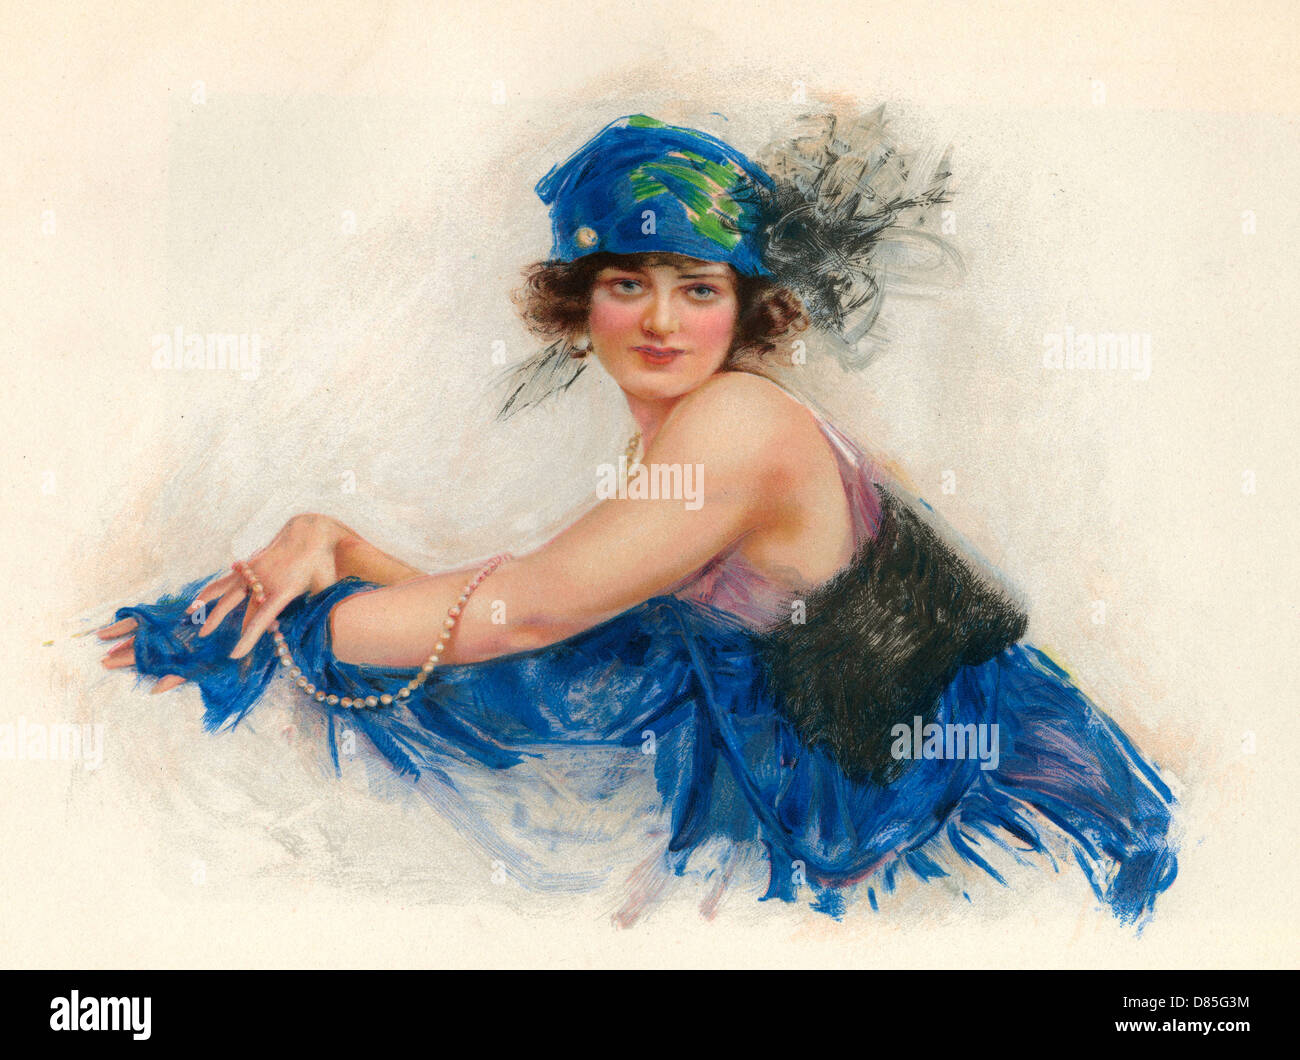 Woman wearing blue headscarf with plumes 1920s Stock Photo